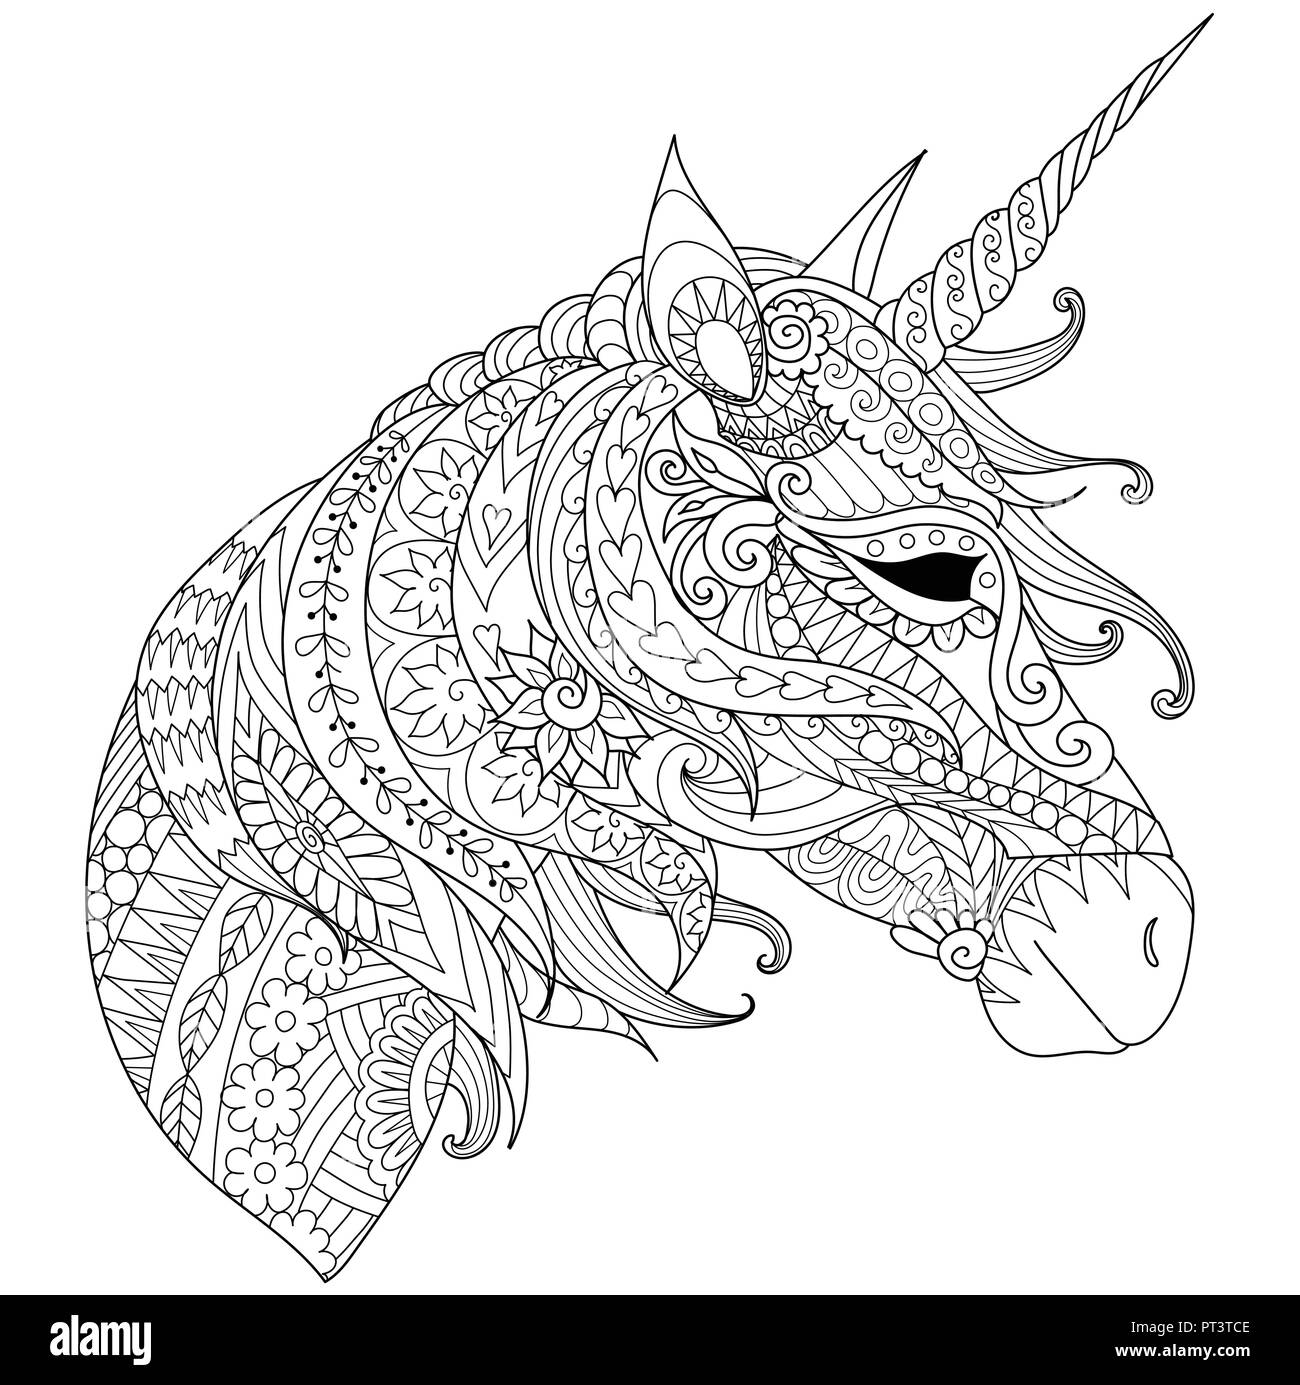 Coloring book for adults colouring pictures with fairytale magic unicorn also can be used for printing on product vector illustration stock vector image art